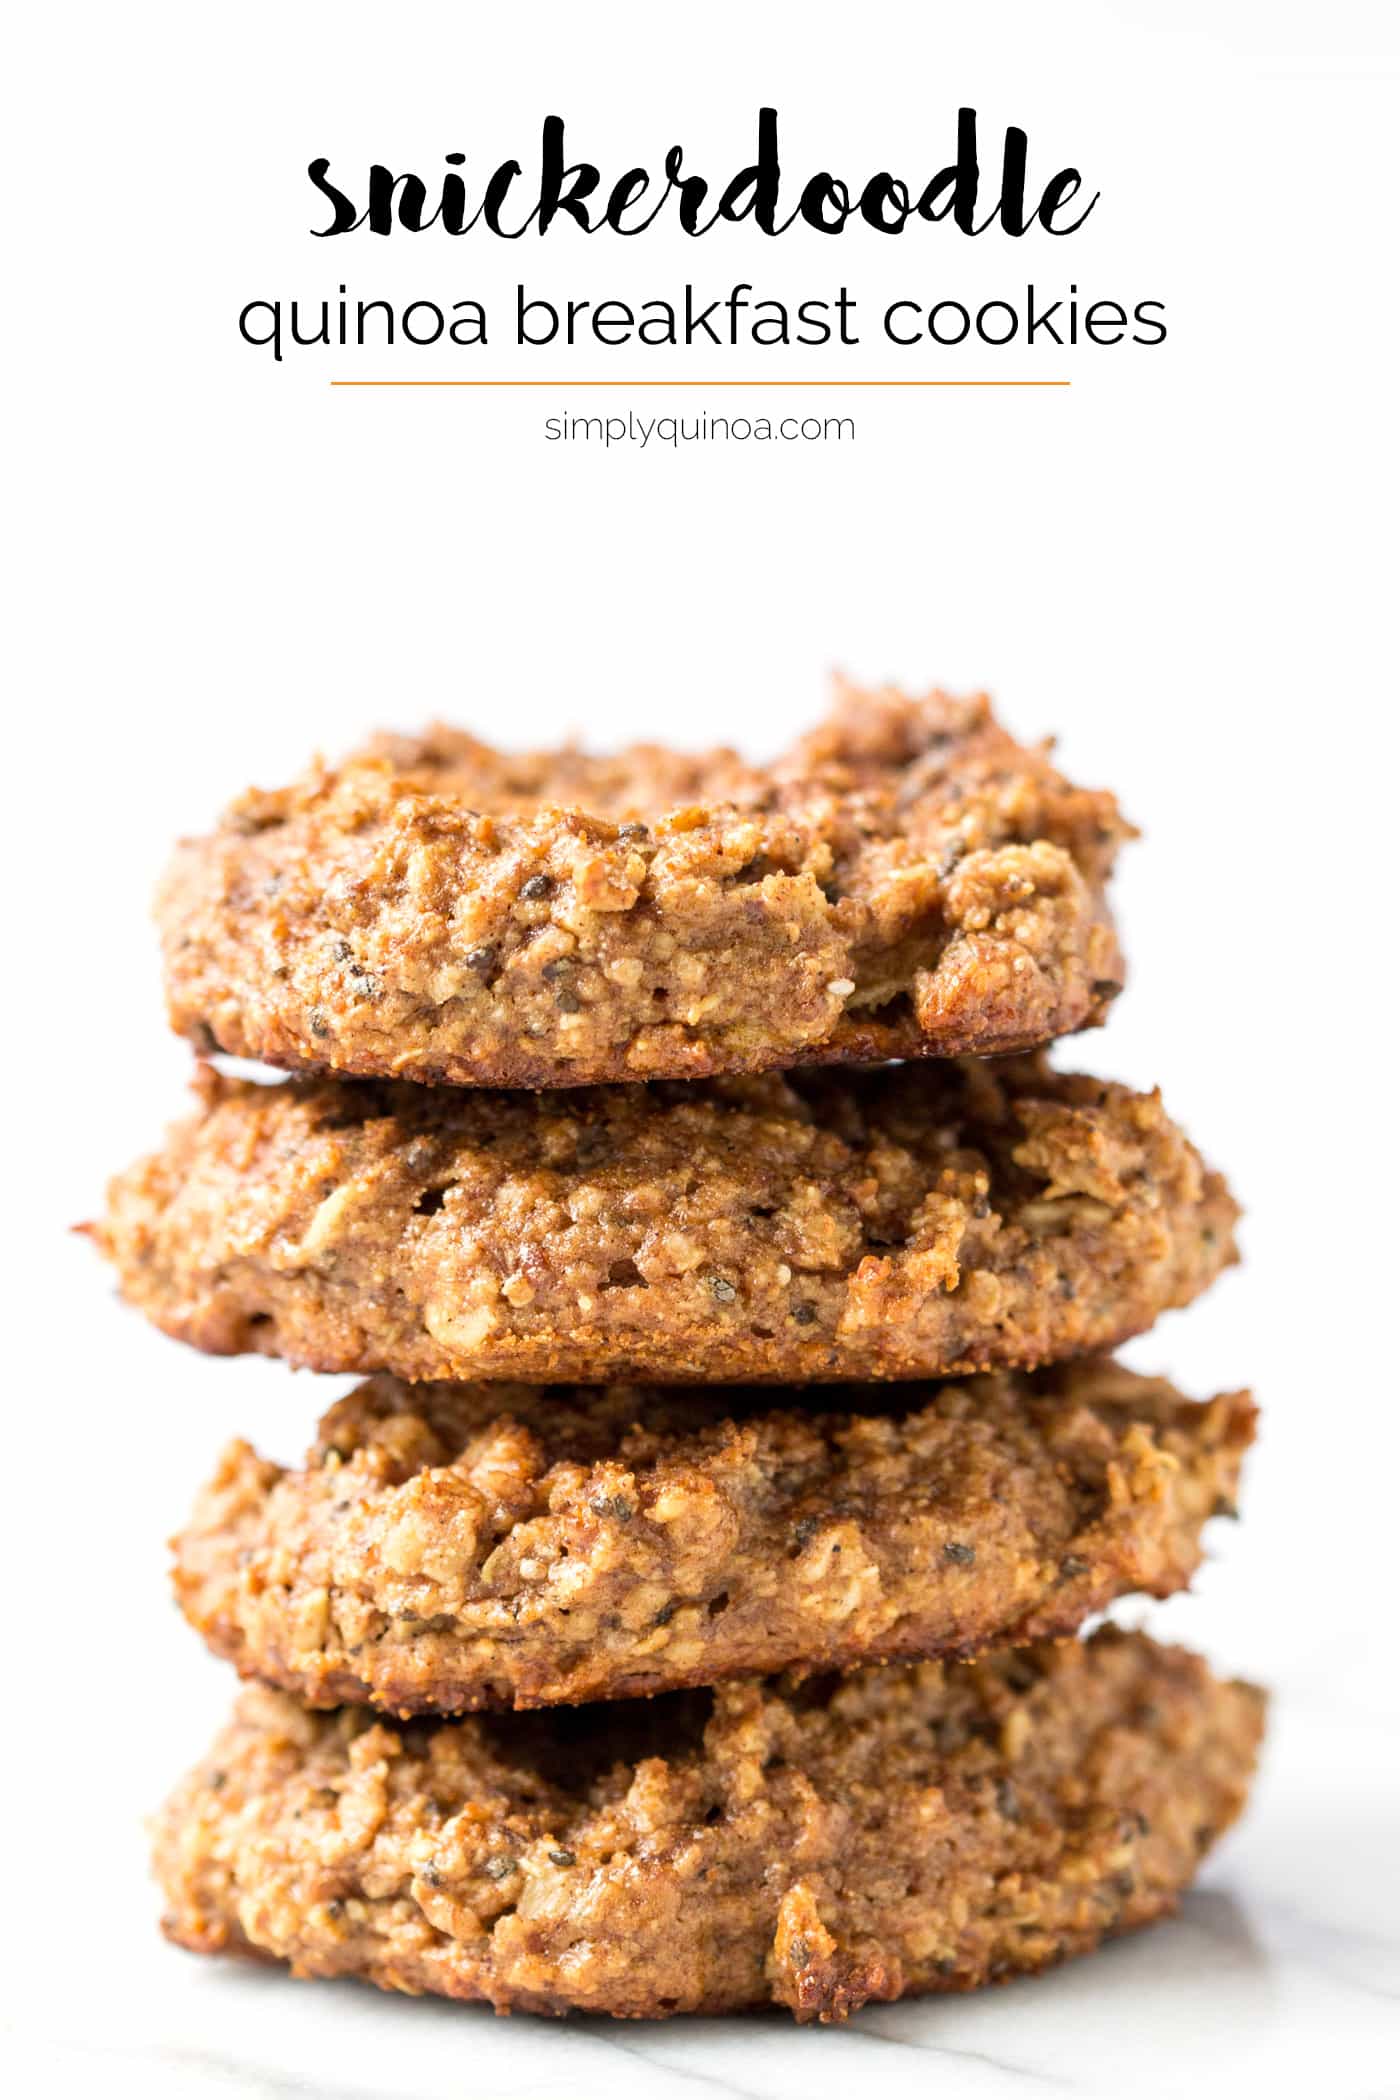 Wish you could have cookies for breakfast every day? YOU CAN! These Snickerdoodle Quinoa Breakfast Cookies are super healthy and SO FLAVORFUL!